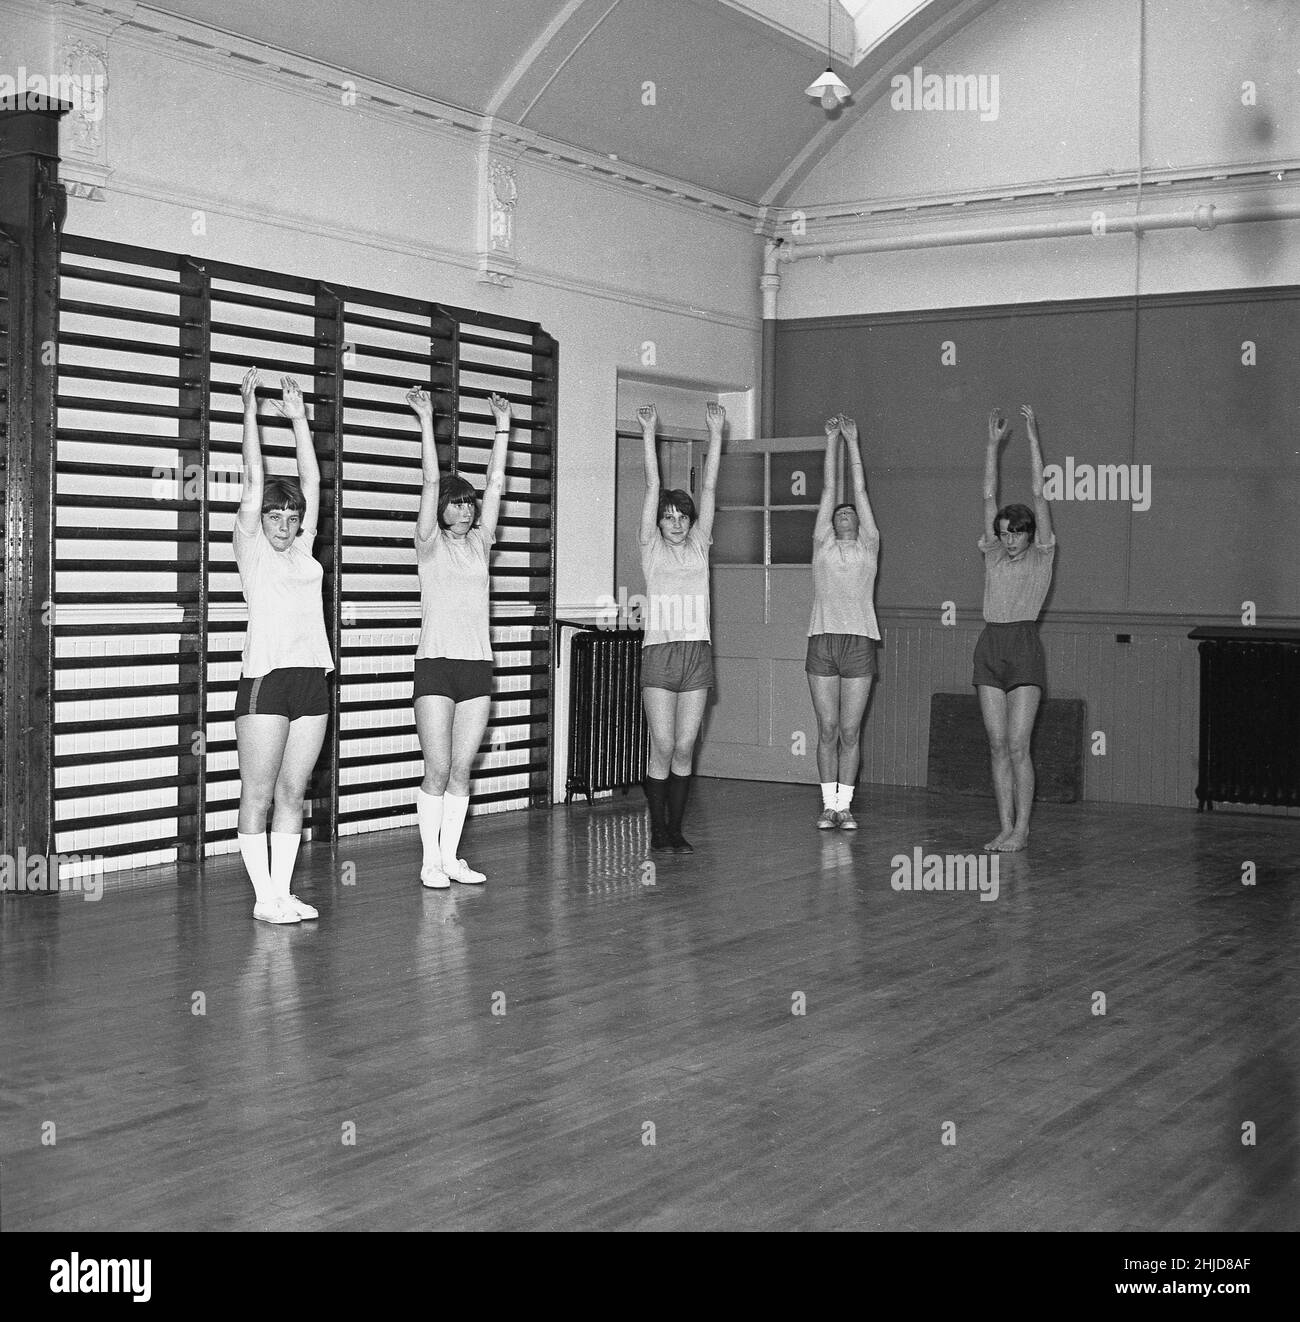 1960s, historical, youth club, inside a sports hall, ssome teenage girls in gym clothes, tops and shorts, and pumps, doing stretching exercises, Scotland, UK. In this era, much like the scouts and girl guides, local youth clubs played an important role in the community by providing young people with activities, both in and outdoors, that improved their health and self-esteem. Stock Photo